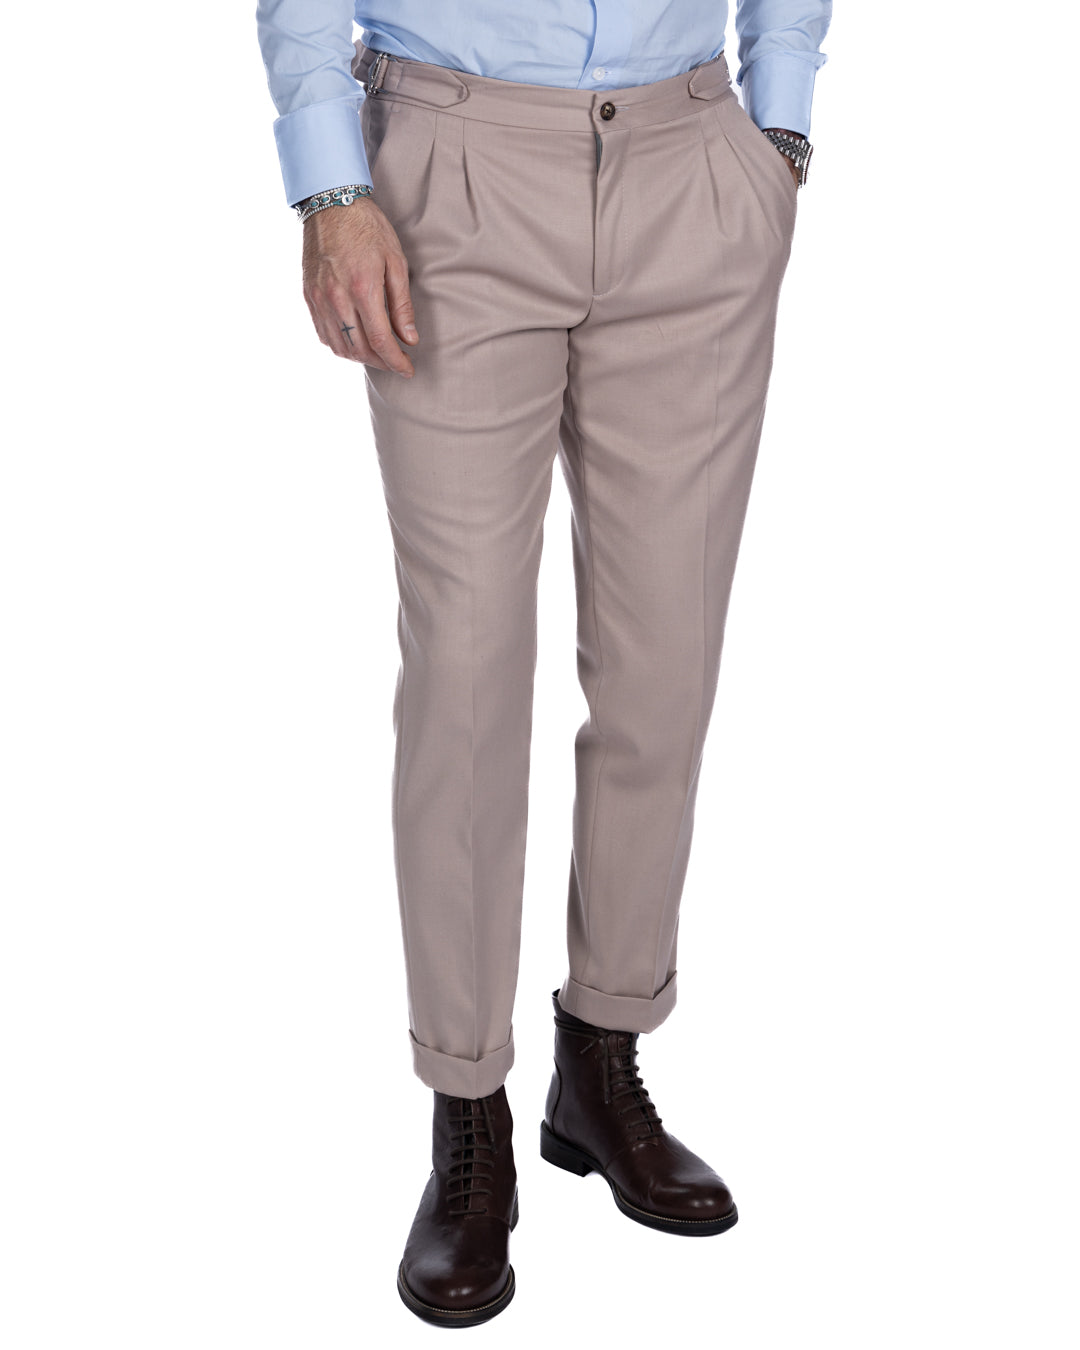 Otranto - beige trousers with buckles and pleats